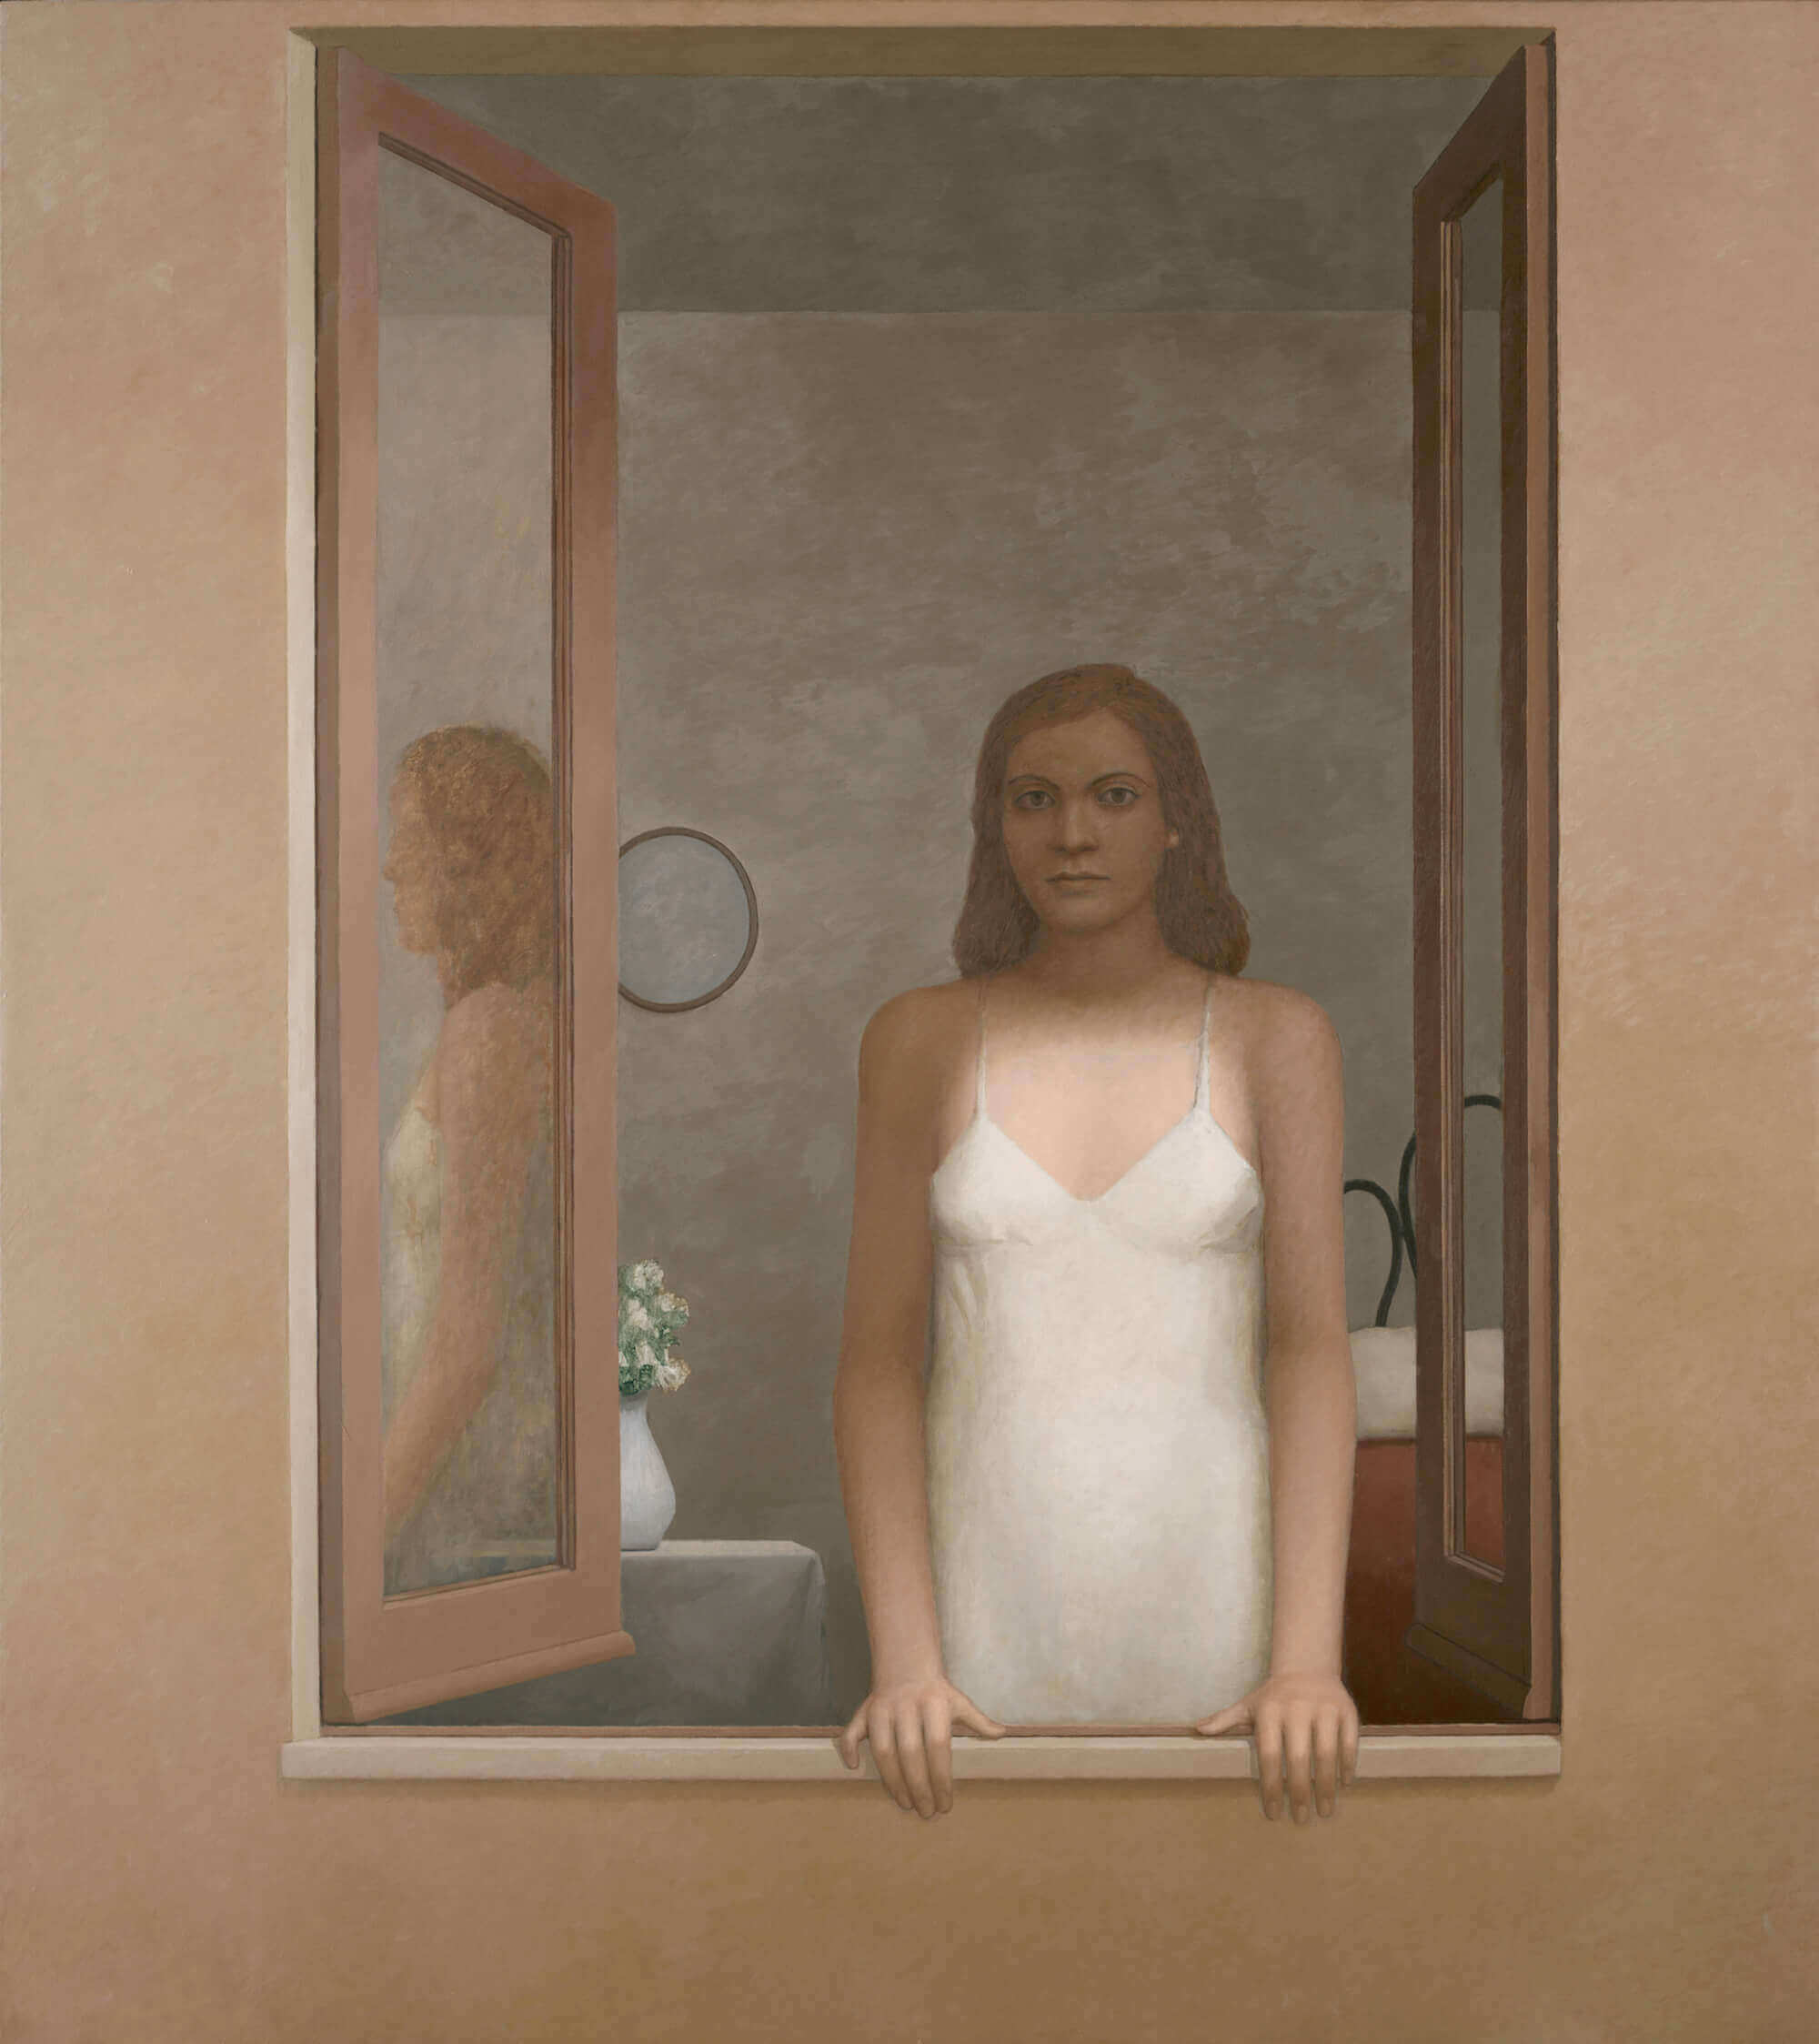 William Bailey, L'Attesa, 2006, oil on linen, 75 x 67 inches (courtesy of the artist and Betty Cuningham Gallery)